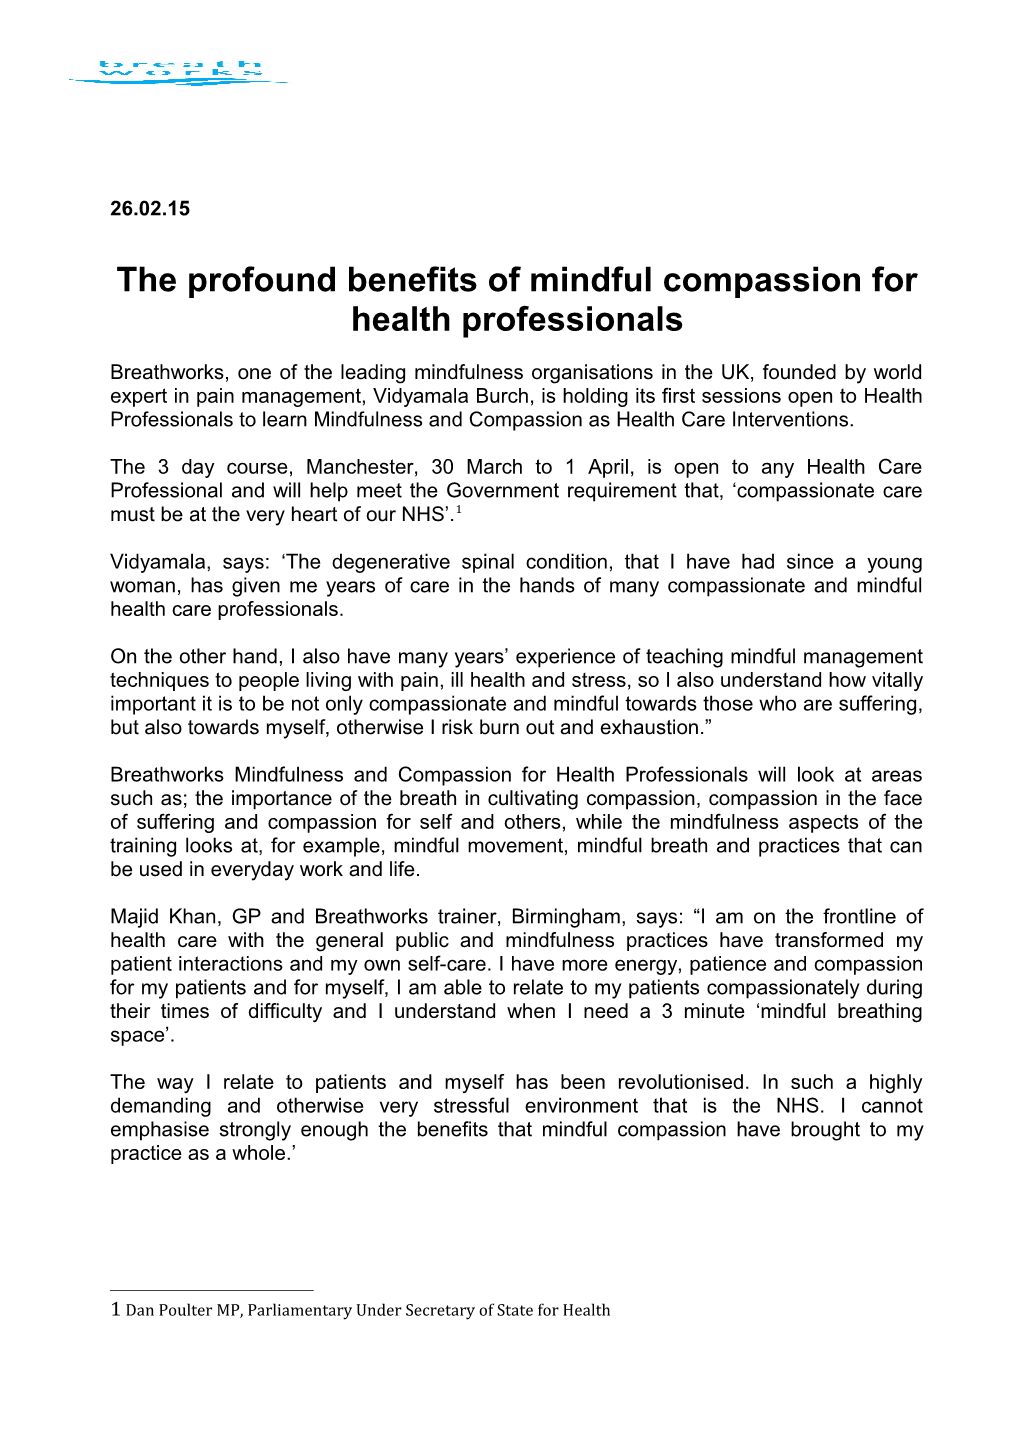 The Profound Benefits of Mindful Compassion for Health Professionals